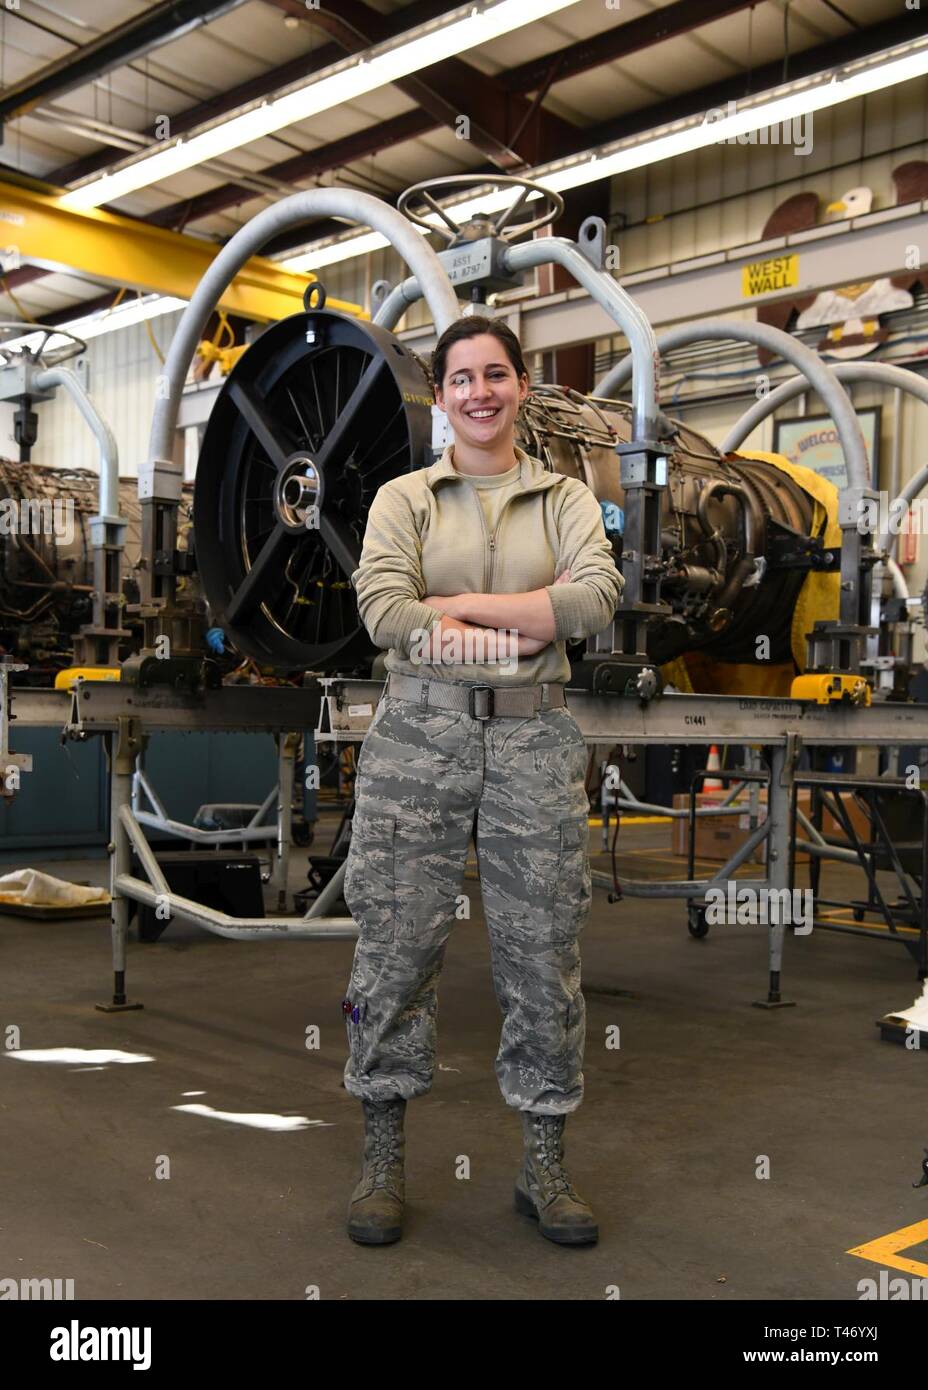 Airman First Class Rachel Kingsley, 104th Maintenance Group aircraft engine mechanic, has worked in the engine shop for four months and is honing her skills as an engine mechanic to ensure the F-15 Eagles are ready to fly. Kingsley said that working as an aircraft engine mechanic at the 104th Fighter Wing has helped her build confidence and leadership skills. Stock Photo